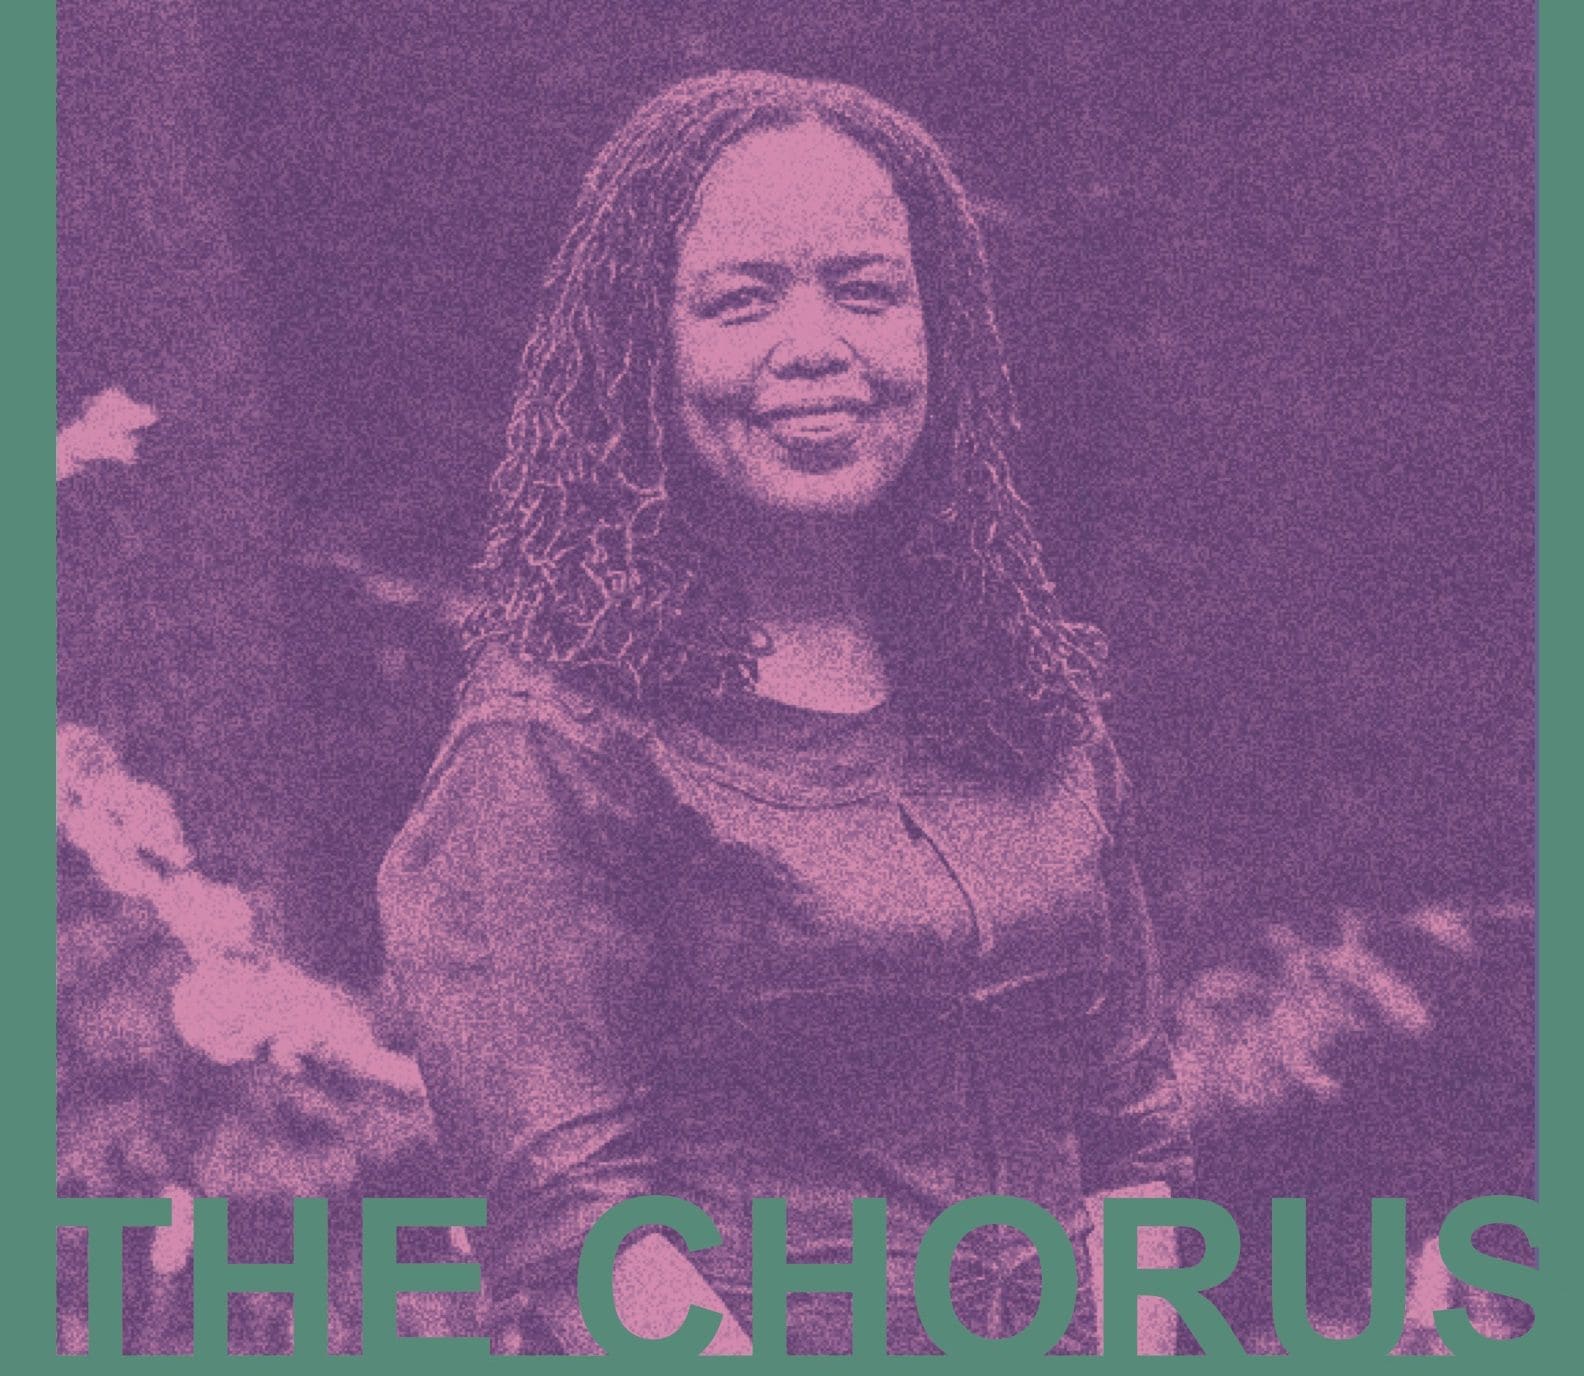 woman with "The Chorus" in large print at the bottom of the image, covered in a purple gradient